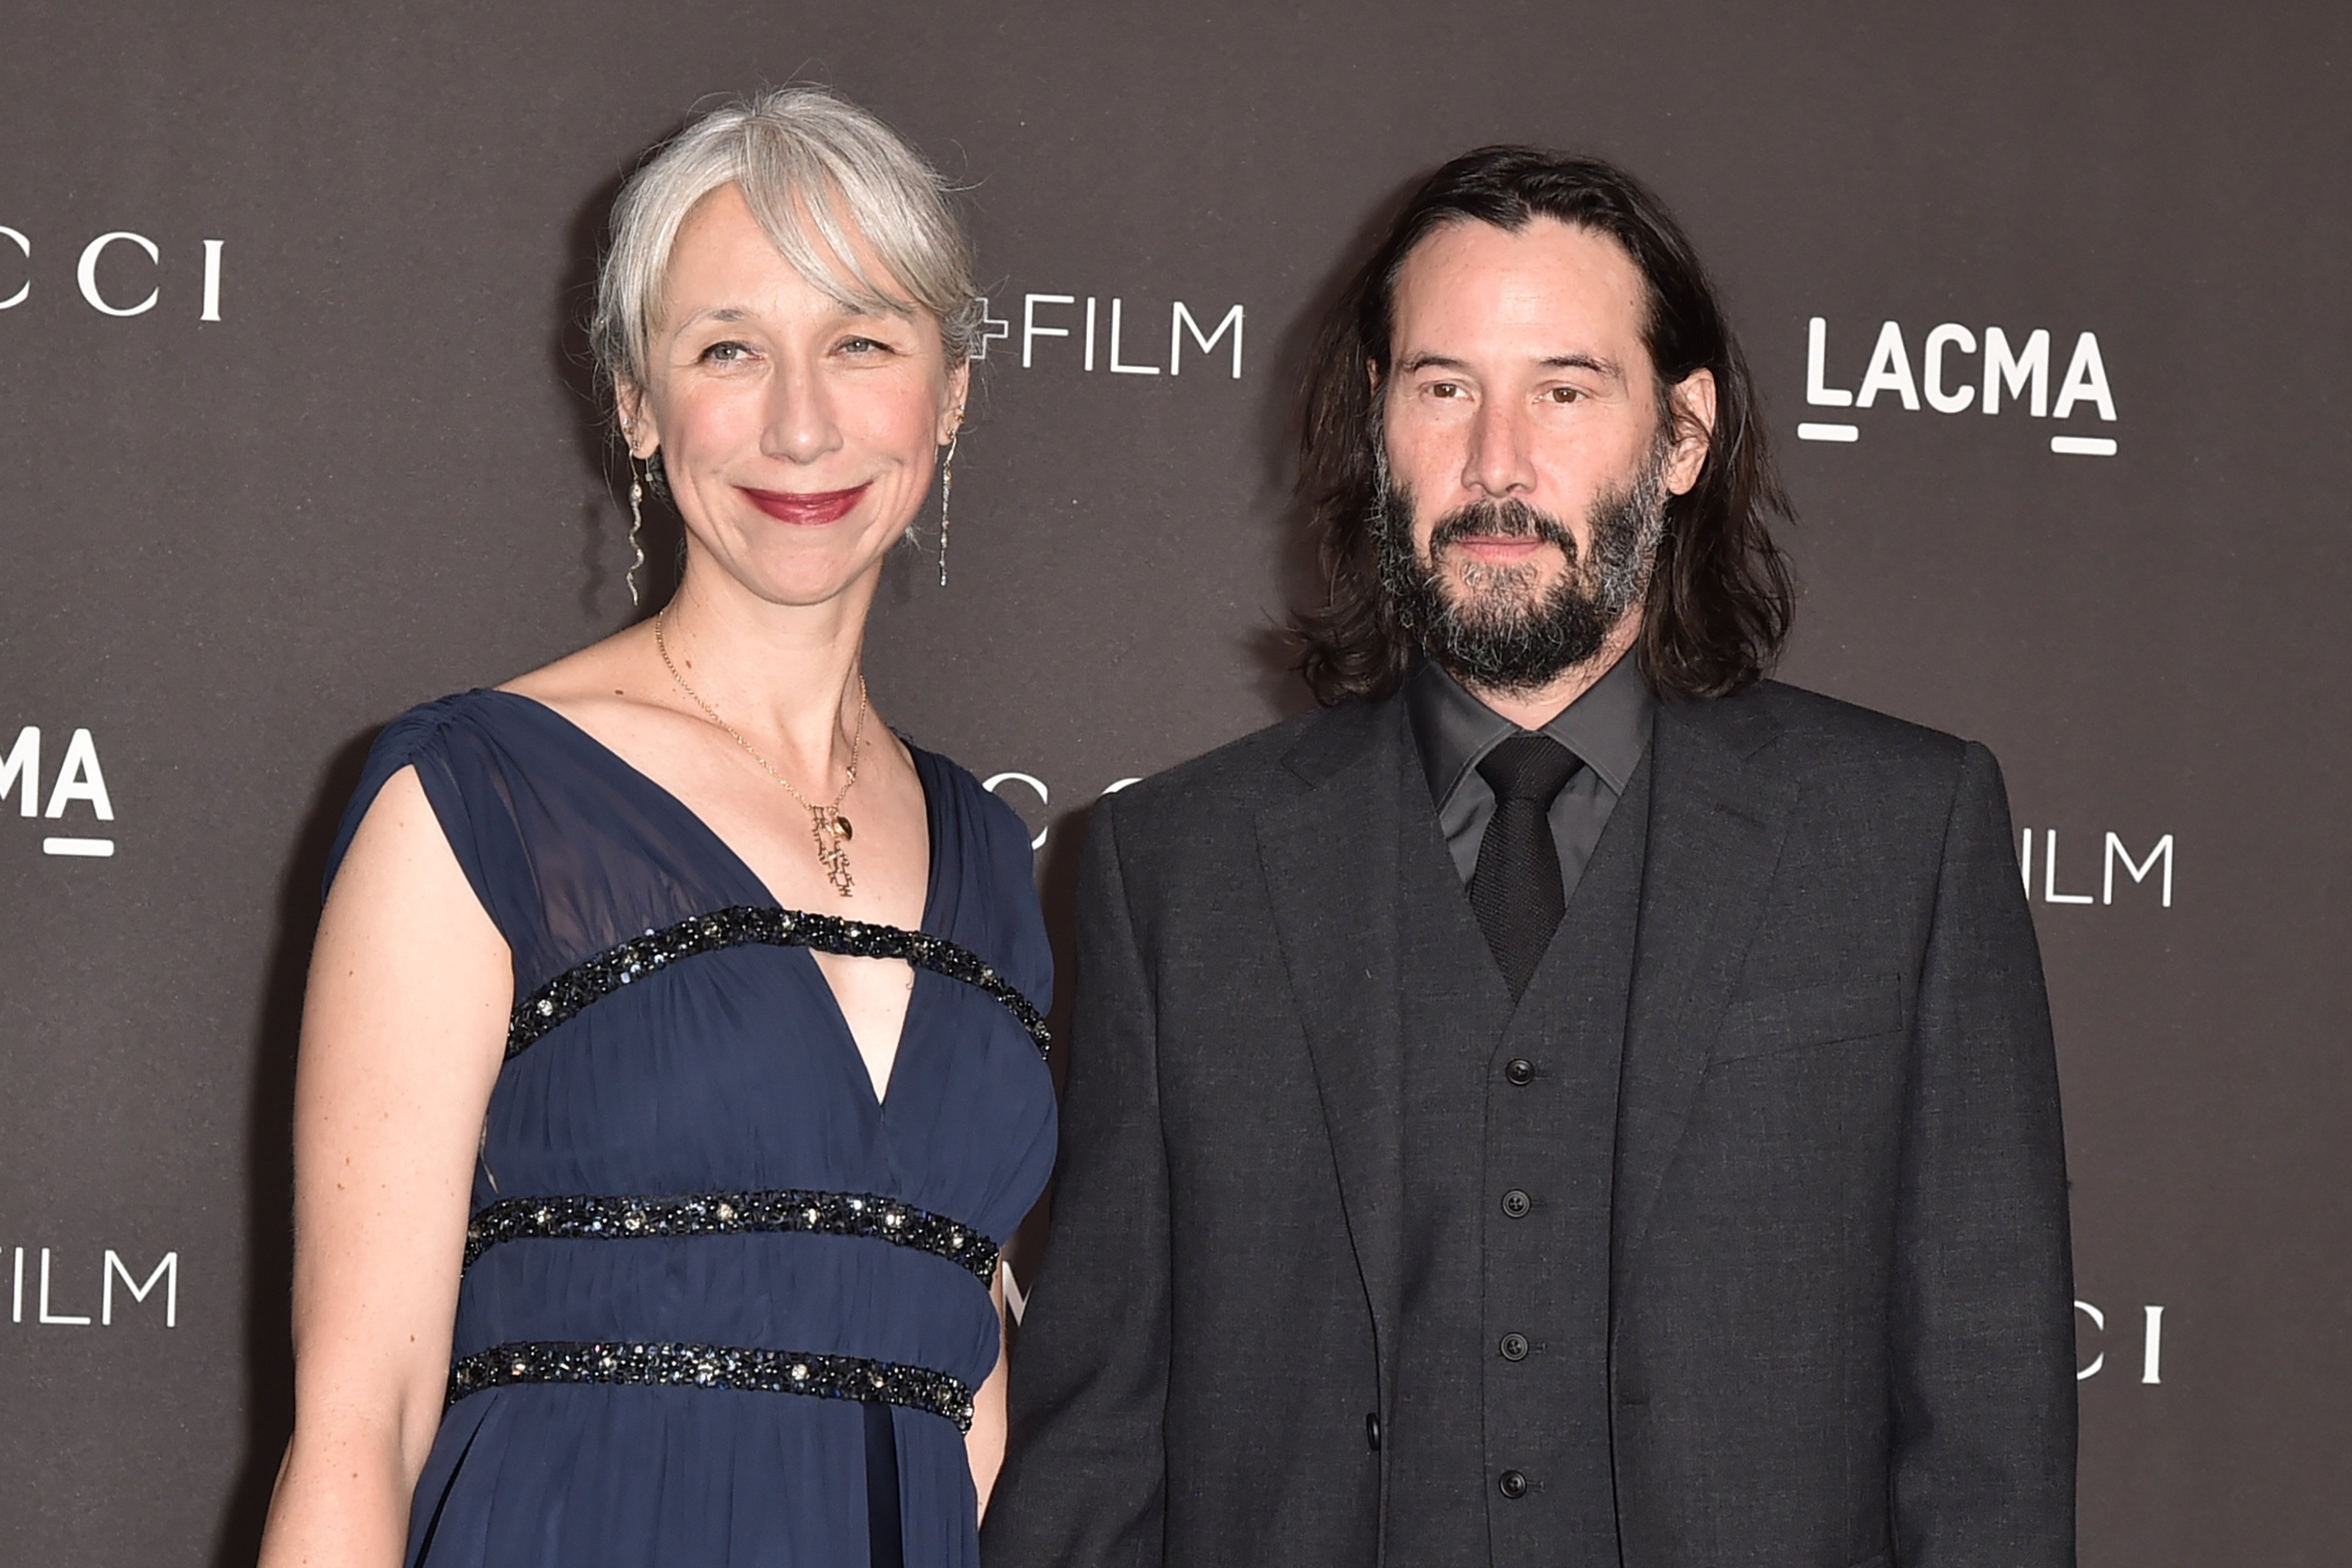 Keanu Reeves and girlfriend Alexandra Grant pose together at an event.